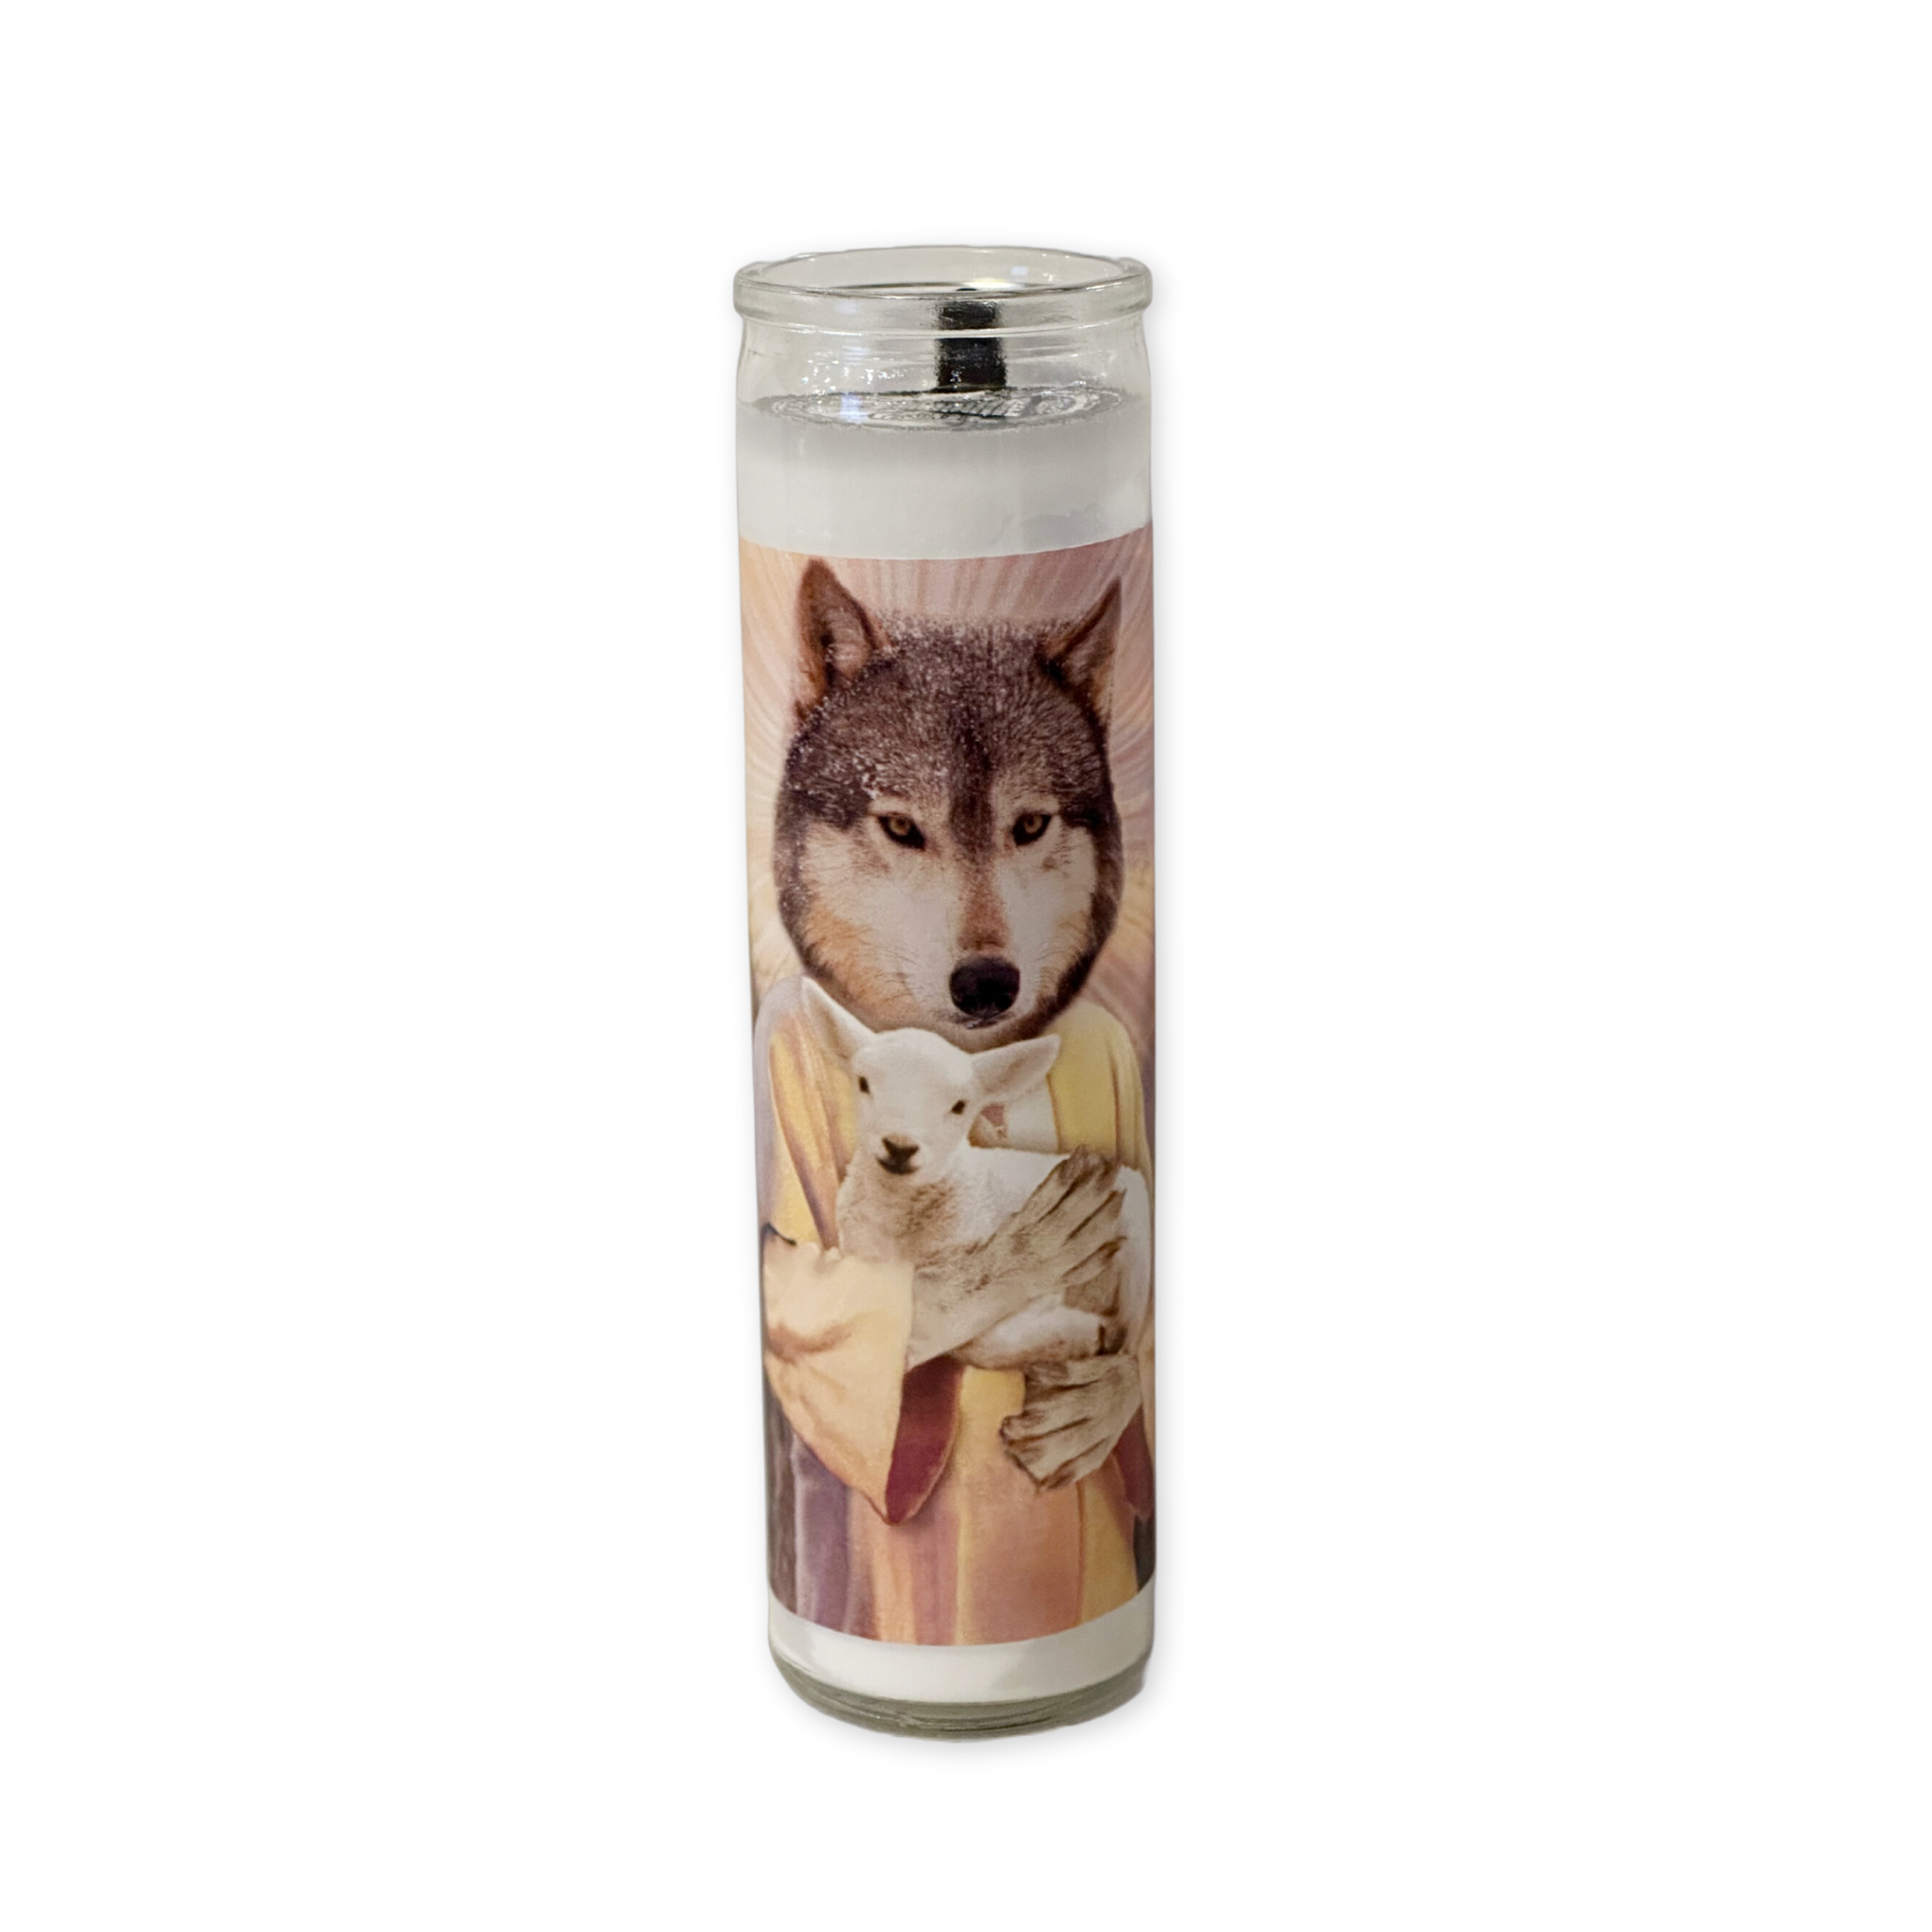 unscented prayer candle with a wolf